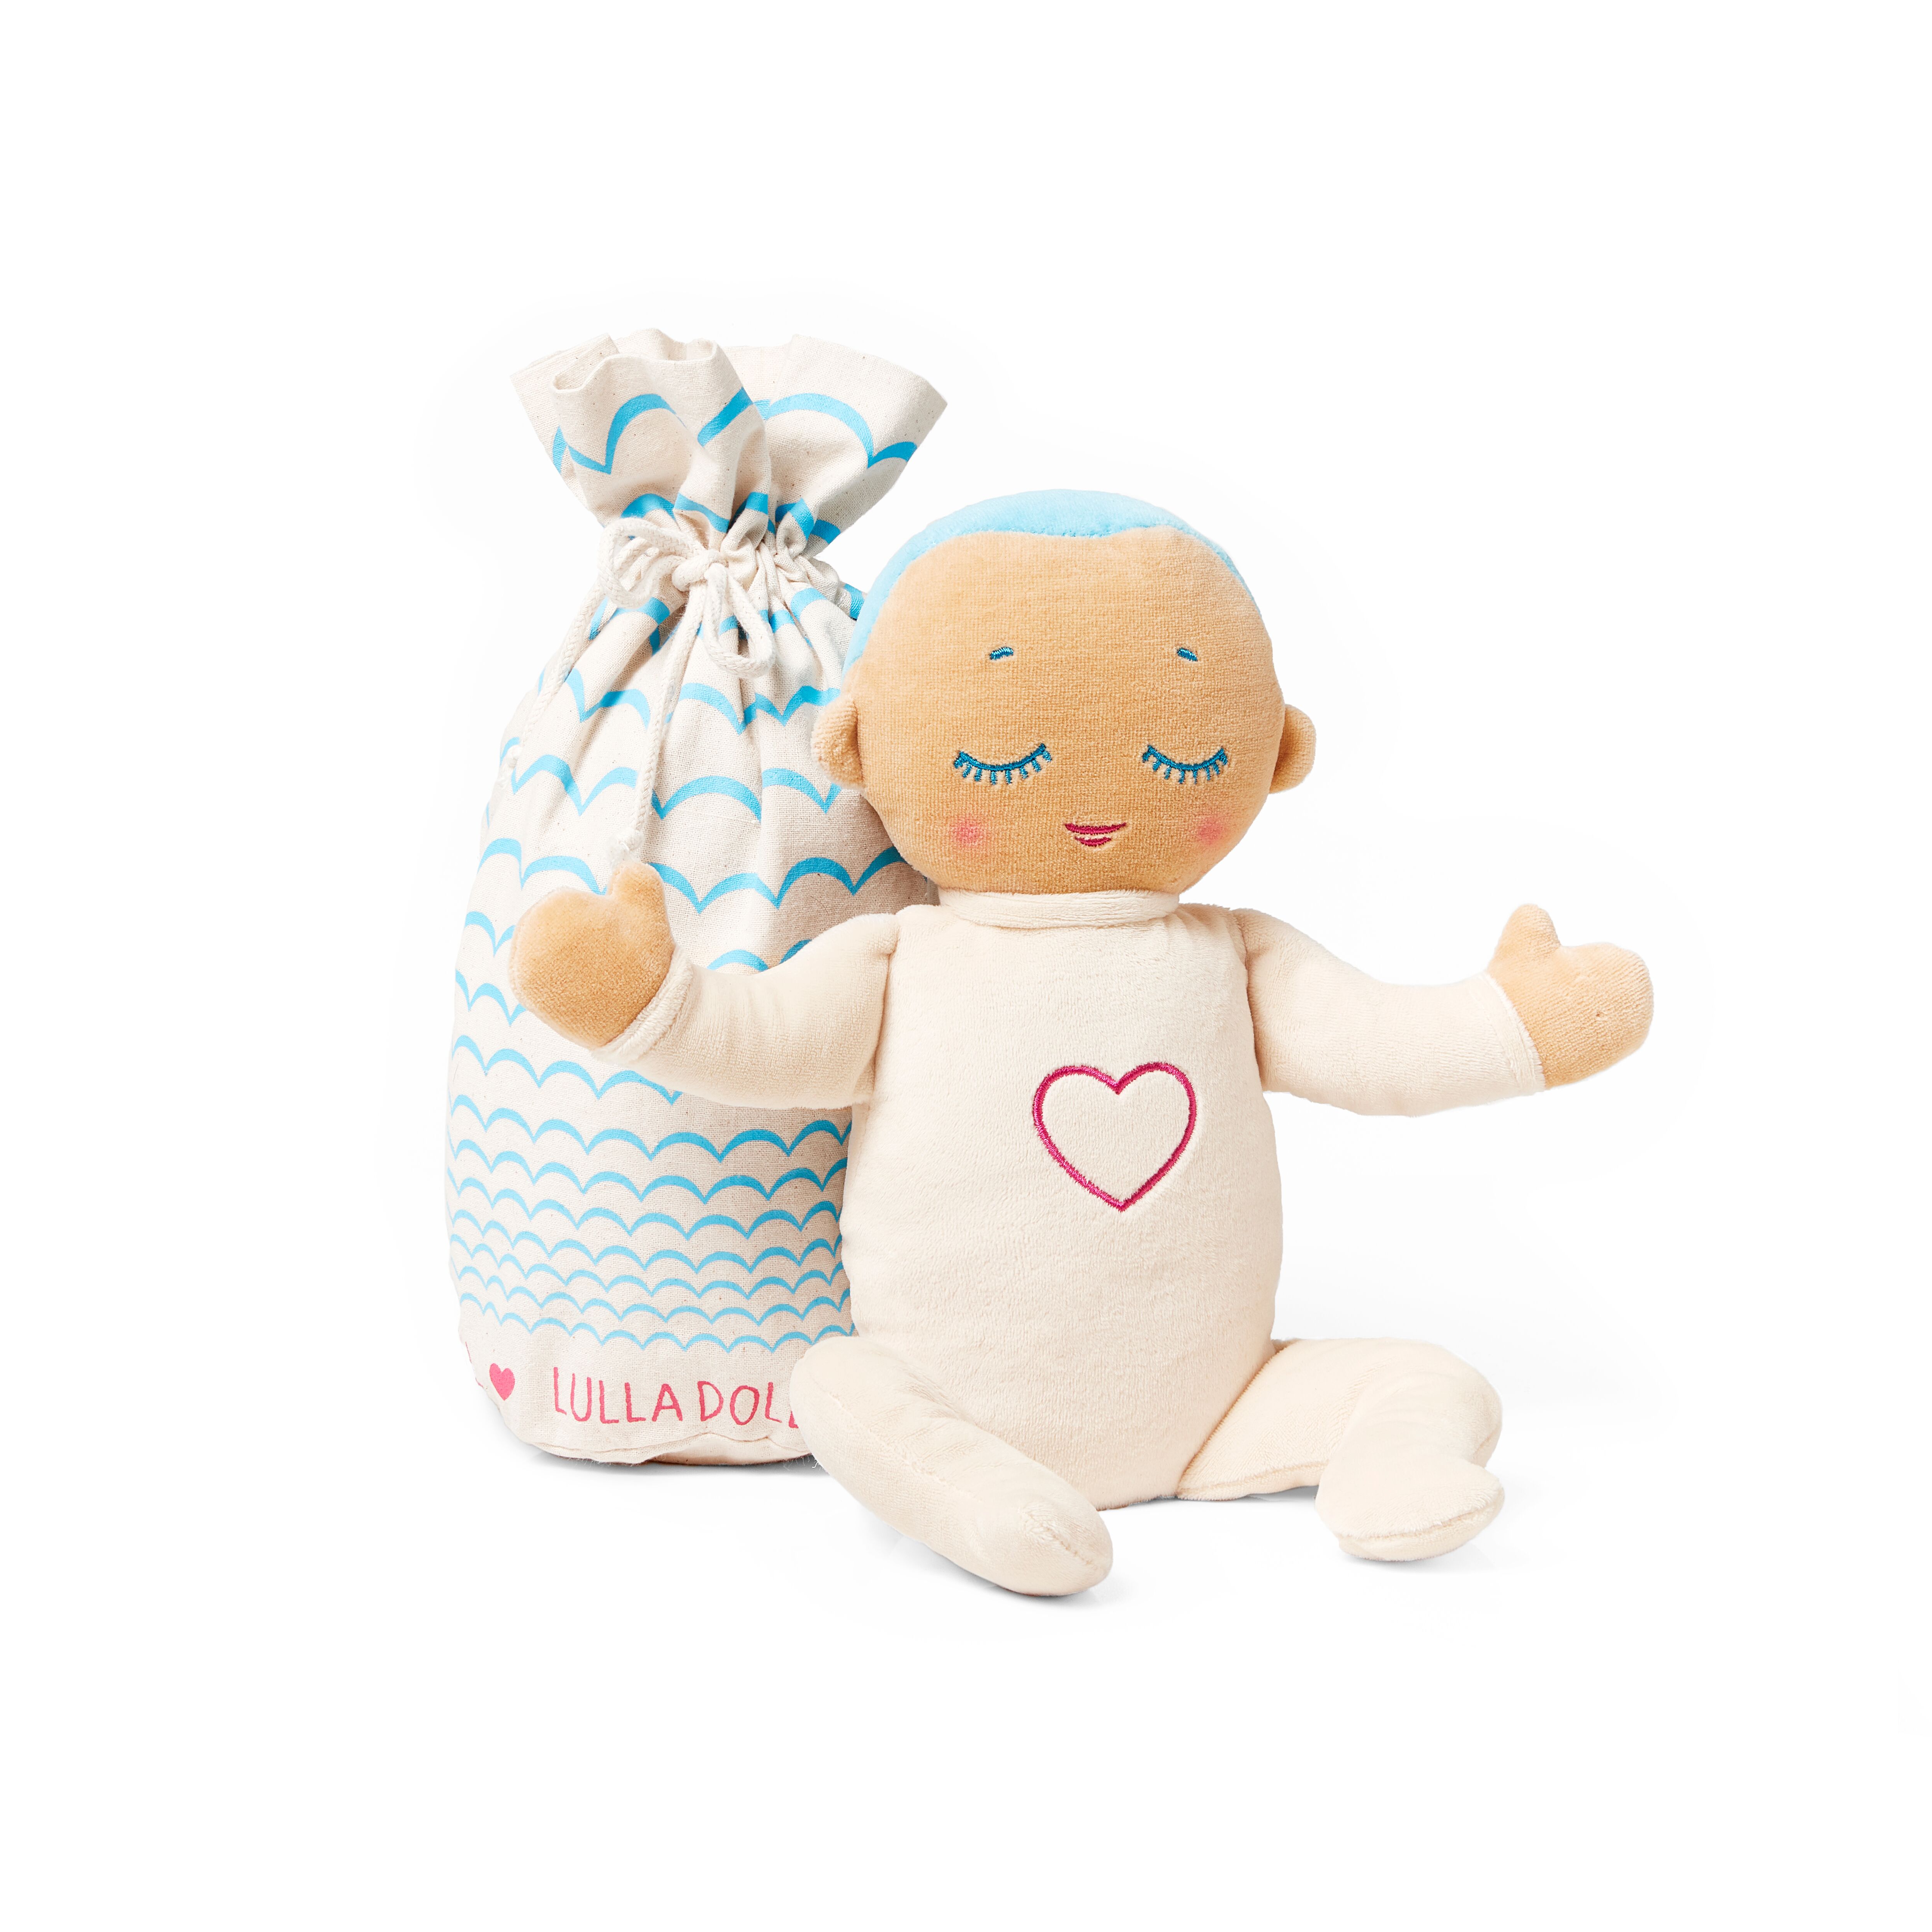 These newly designed Lulla dolls mimic Mom's breathing for a better night sleep for all